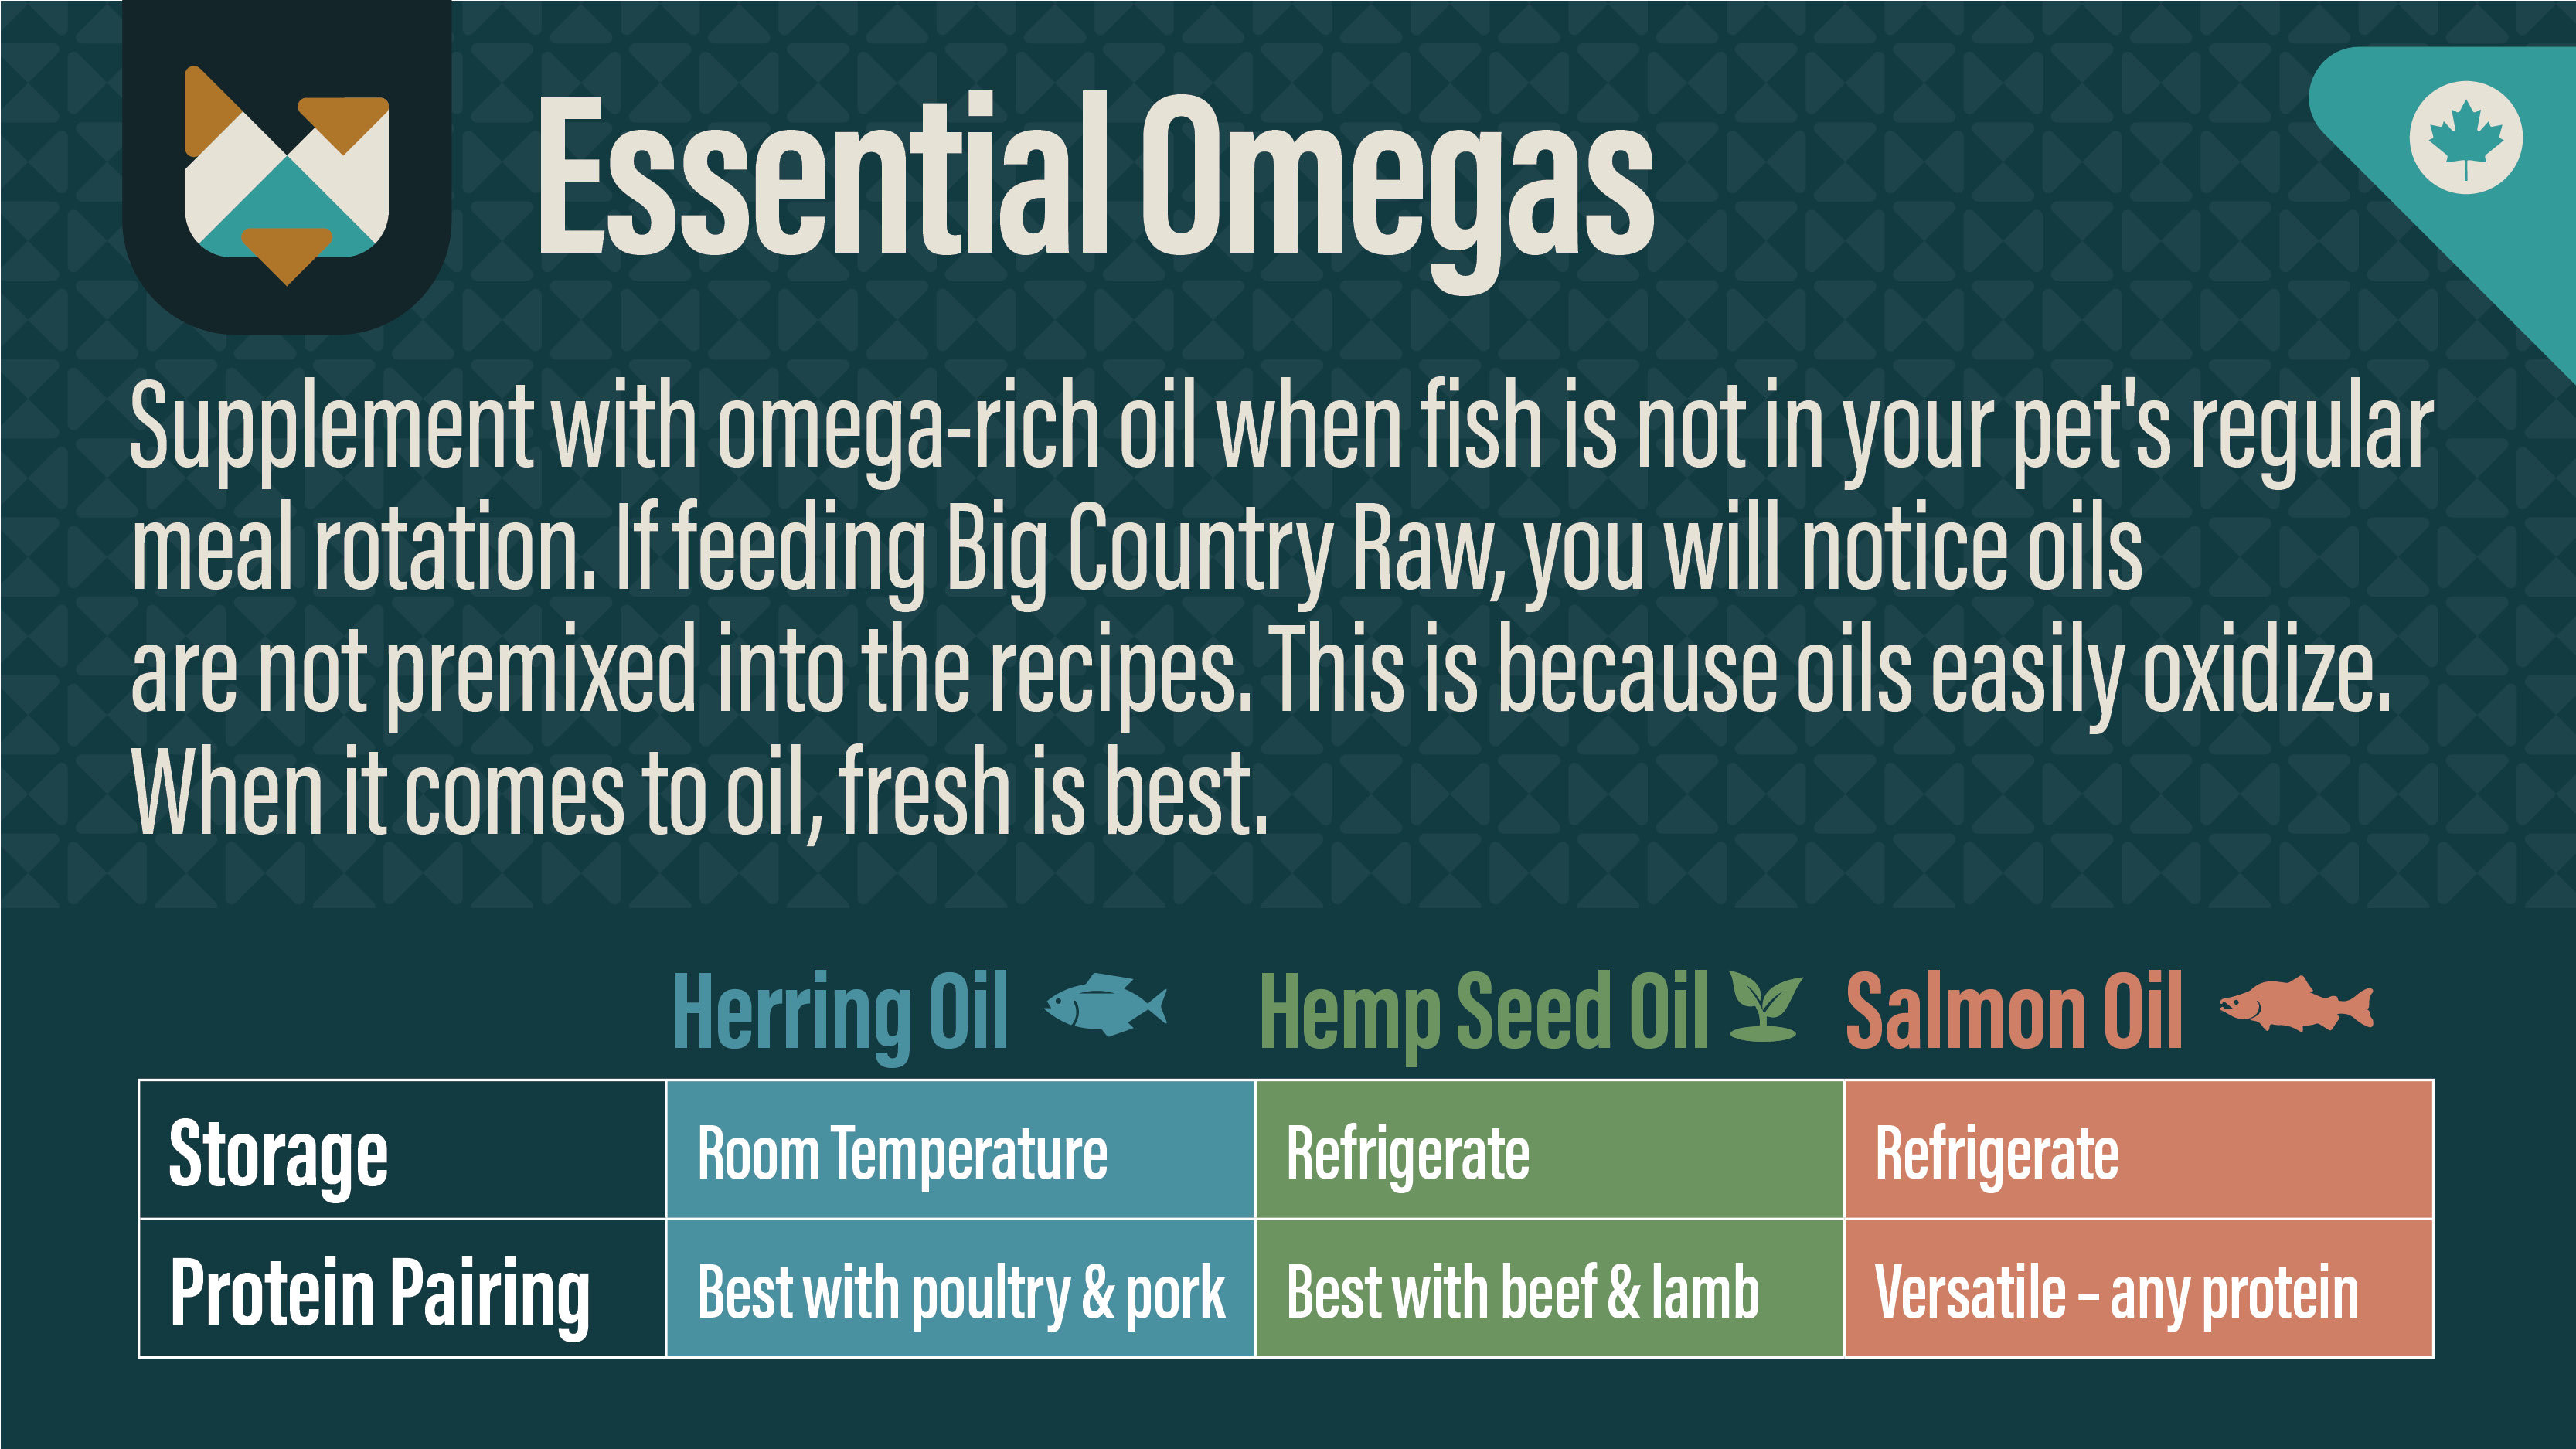 Essential Omegas. Supplement with omega-rich oil if fish is not in your pet's regular meal rotation. If feeding Big Country Raw, you will notice oils are not premixed into the recipes because oils easily oxidize. When it comes to oils, fresh is best.